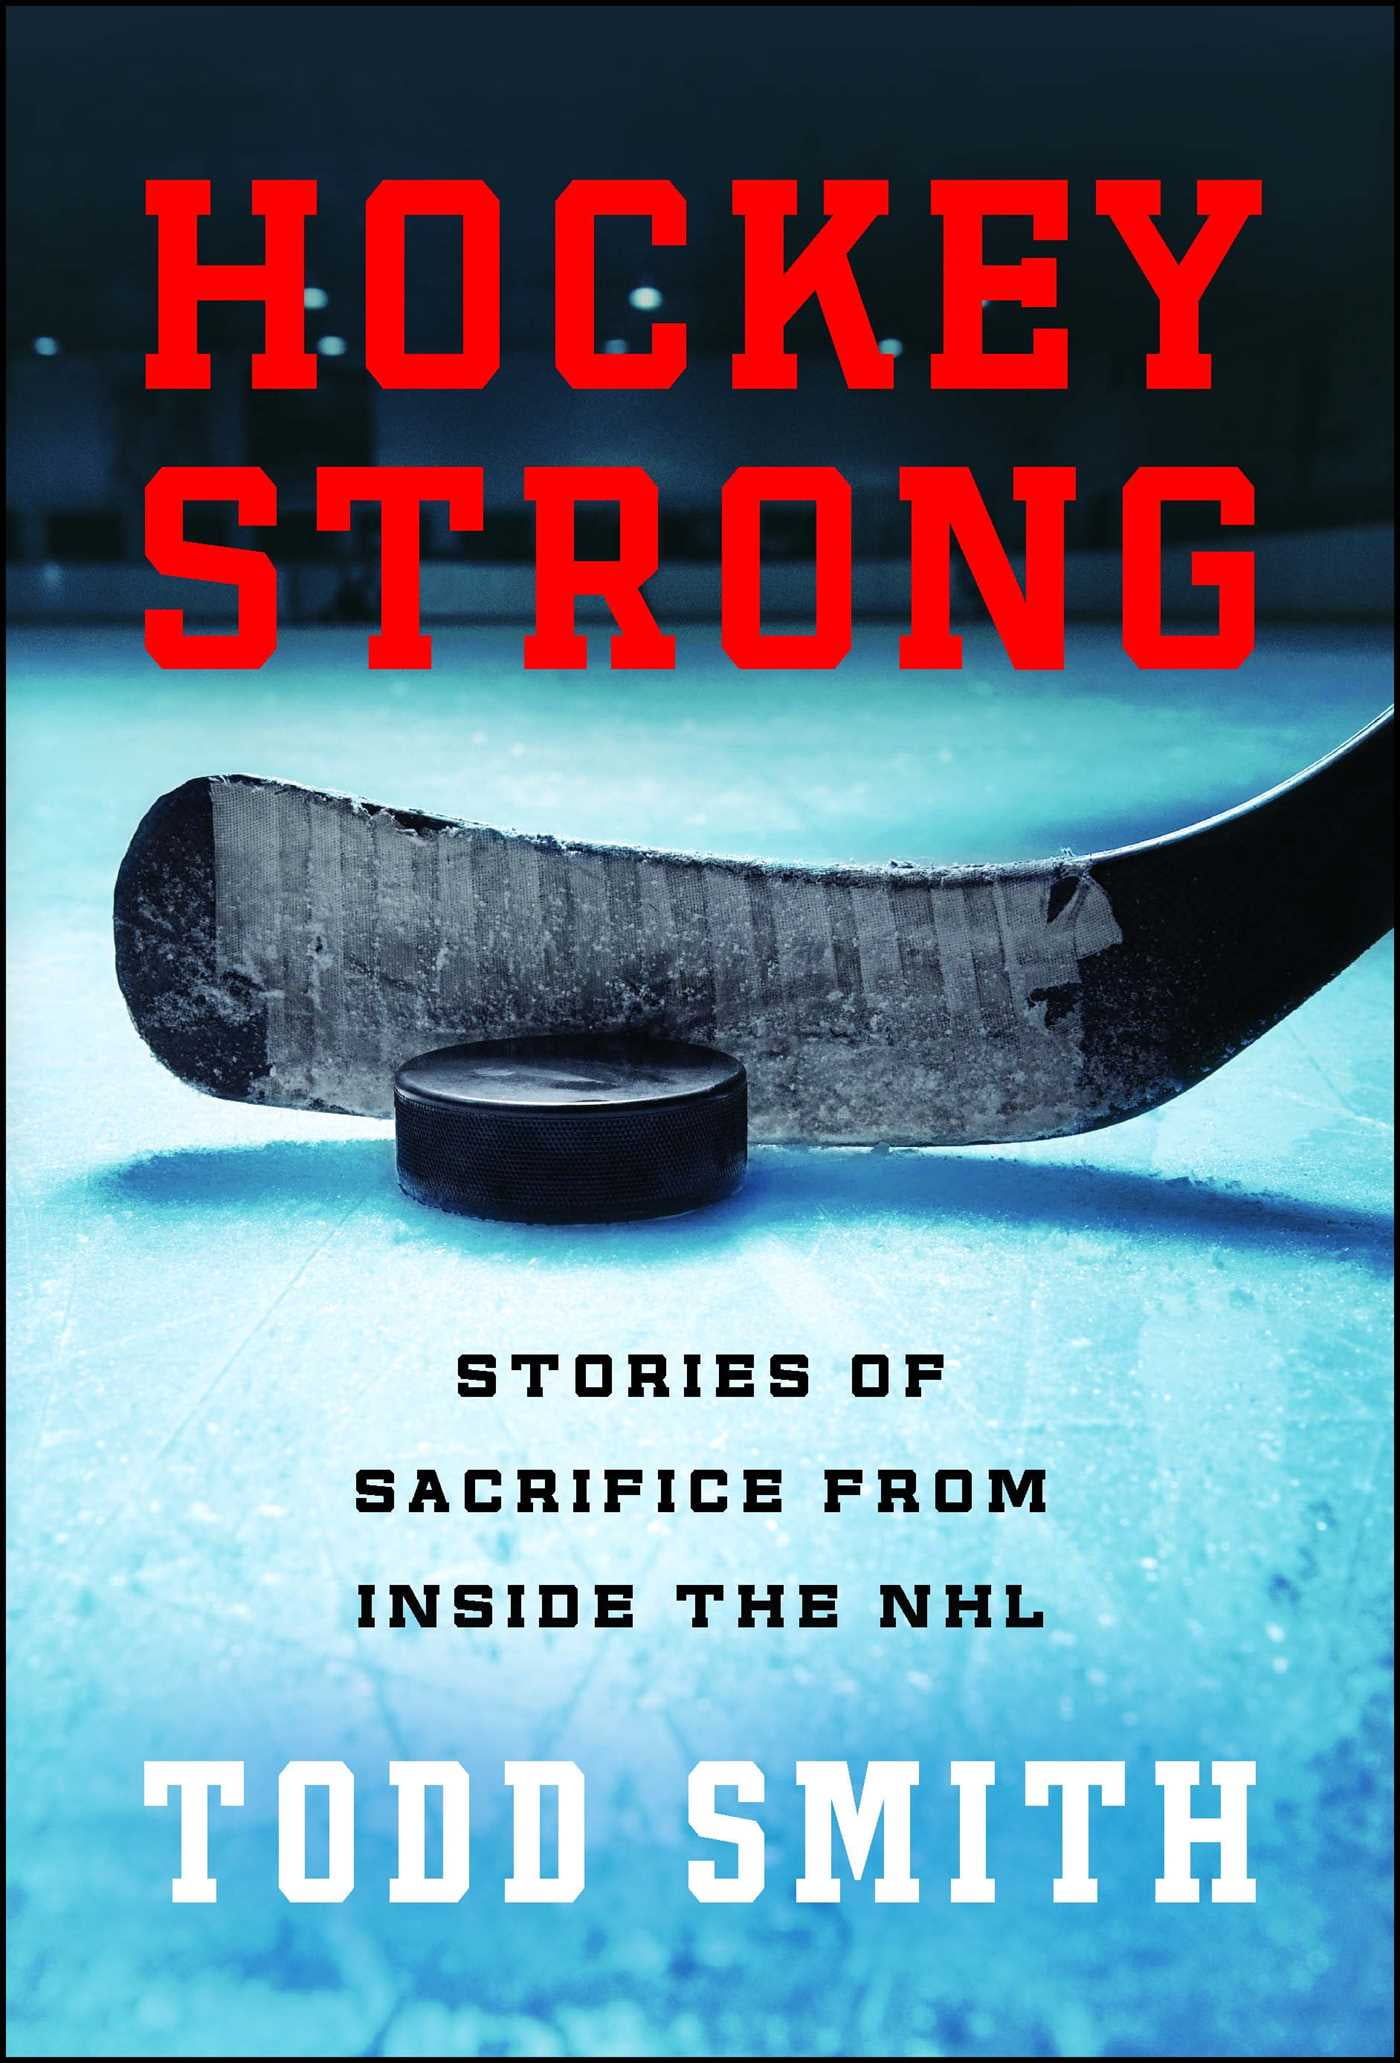 Hockey-Strong-Stories-of-Sacrifice-from-Inside-the-NHL